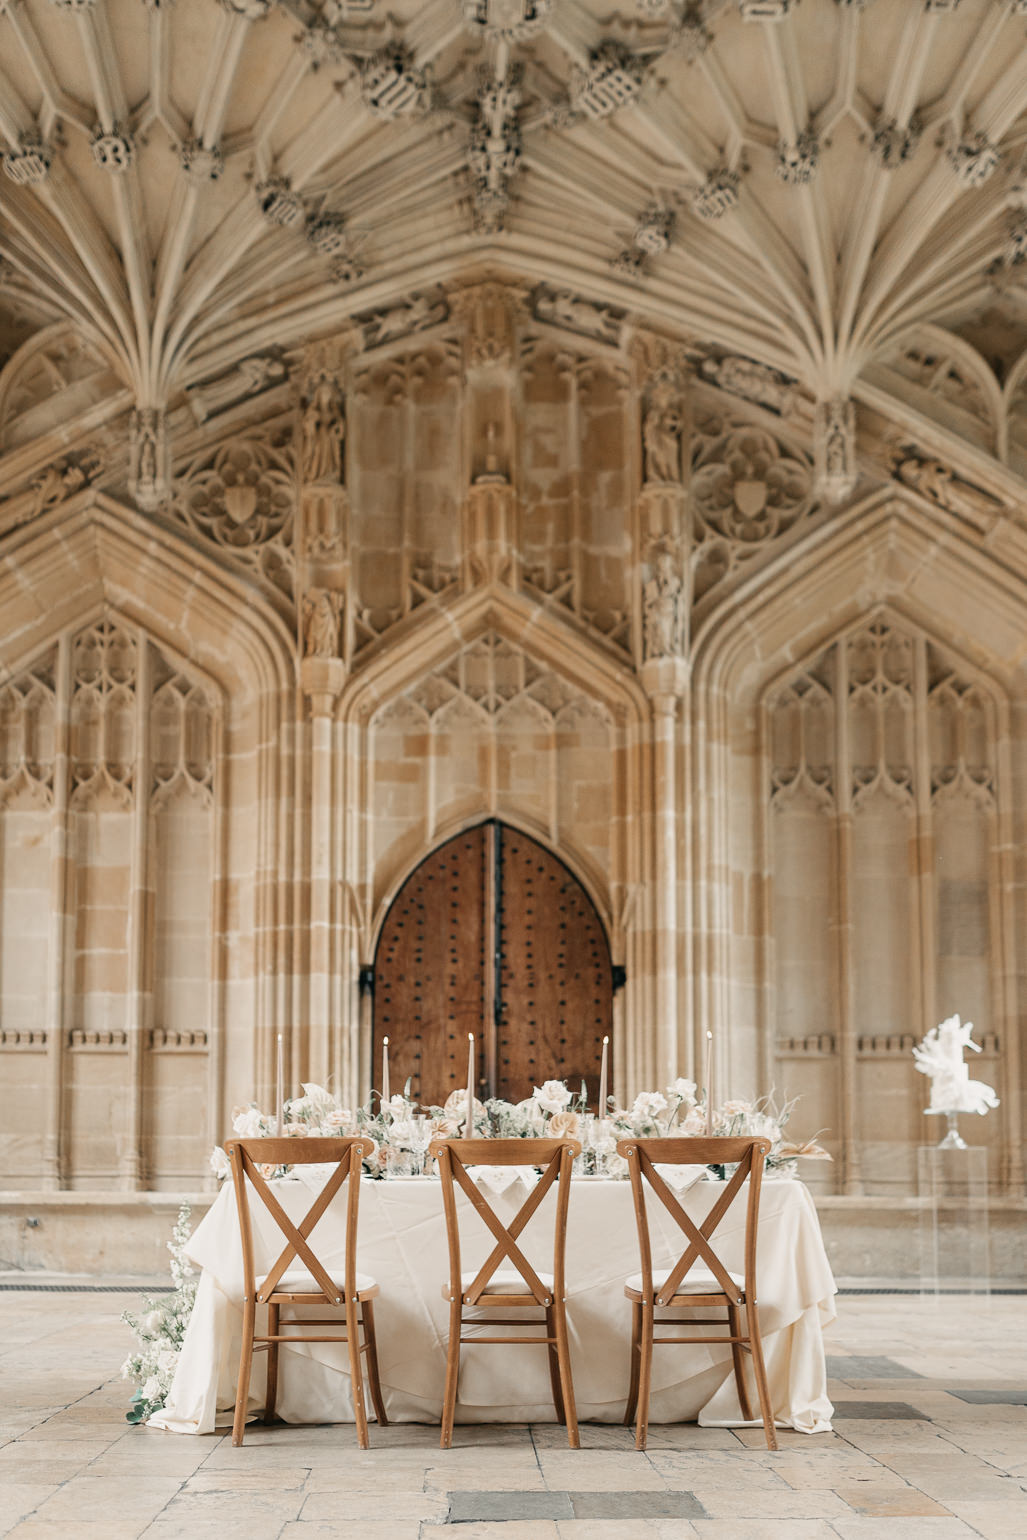 celestial wedding themed wedding table at Bodleian library